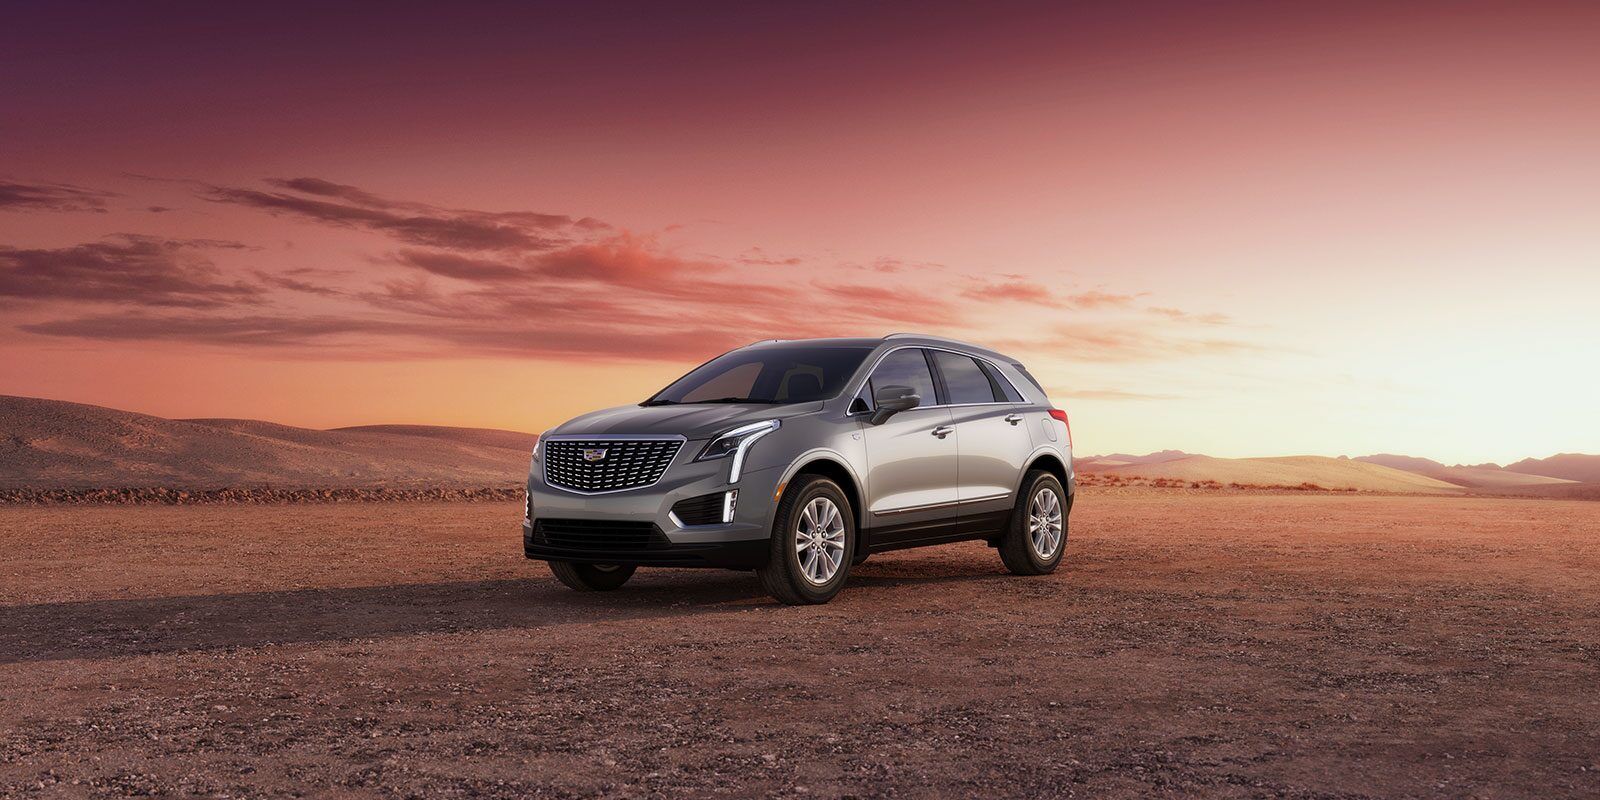 Front 3/4 view of 2023 Cadillac XT5 on empty land.